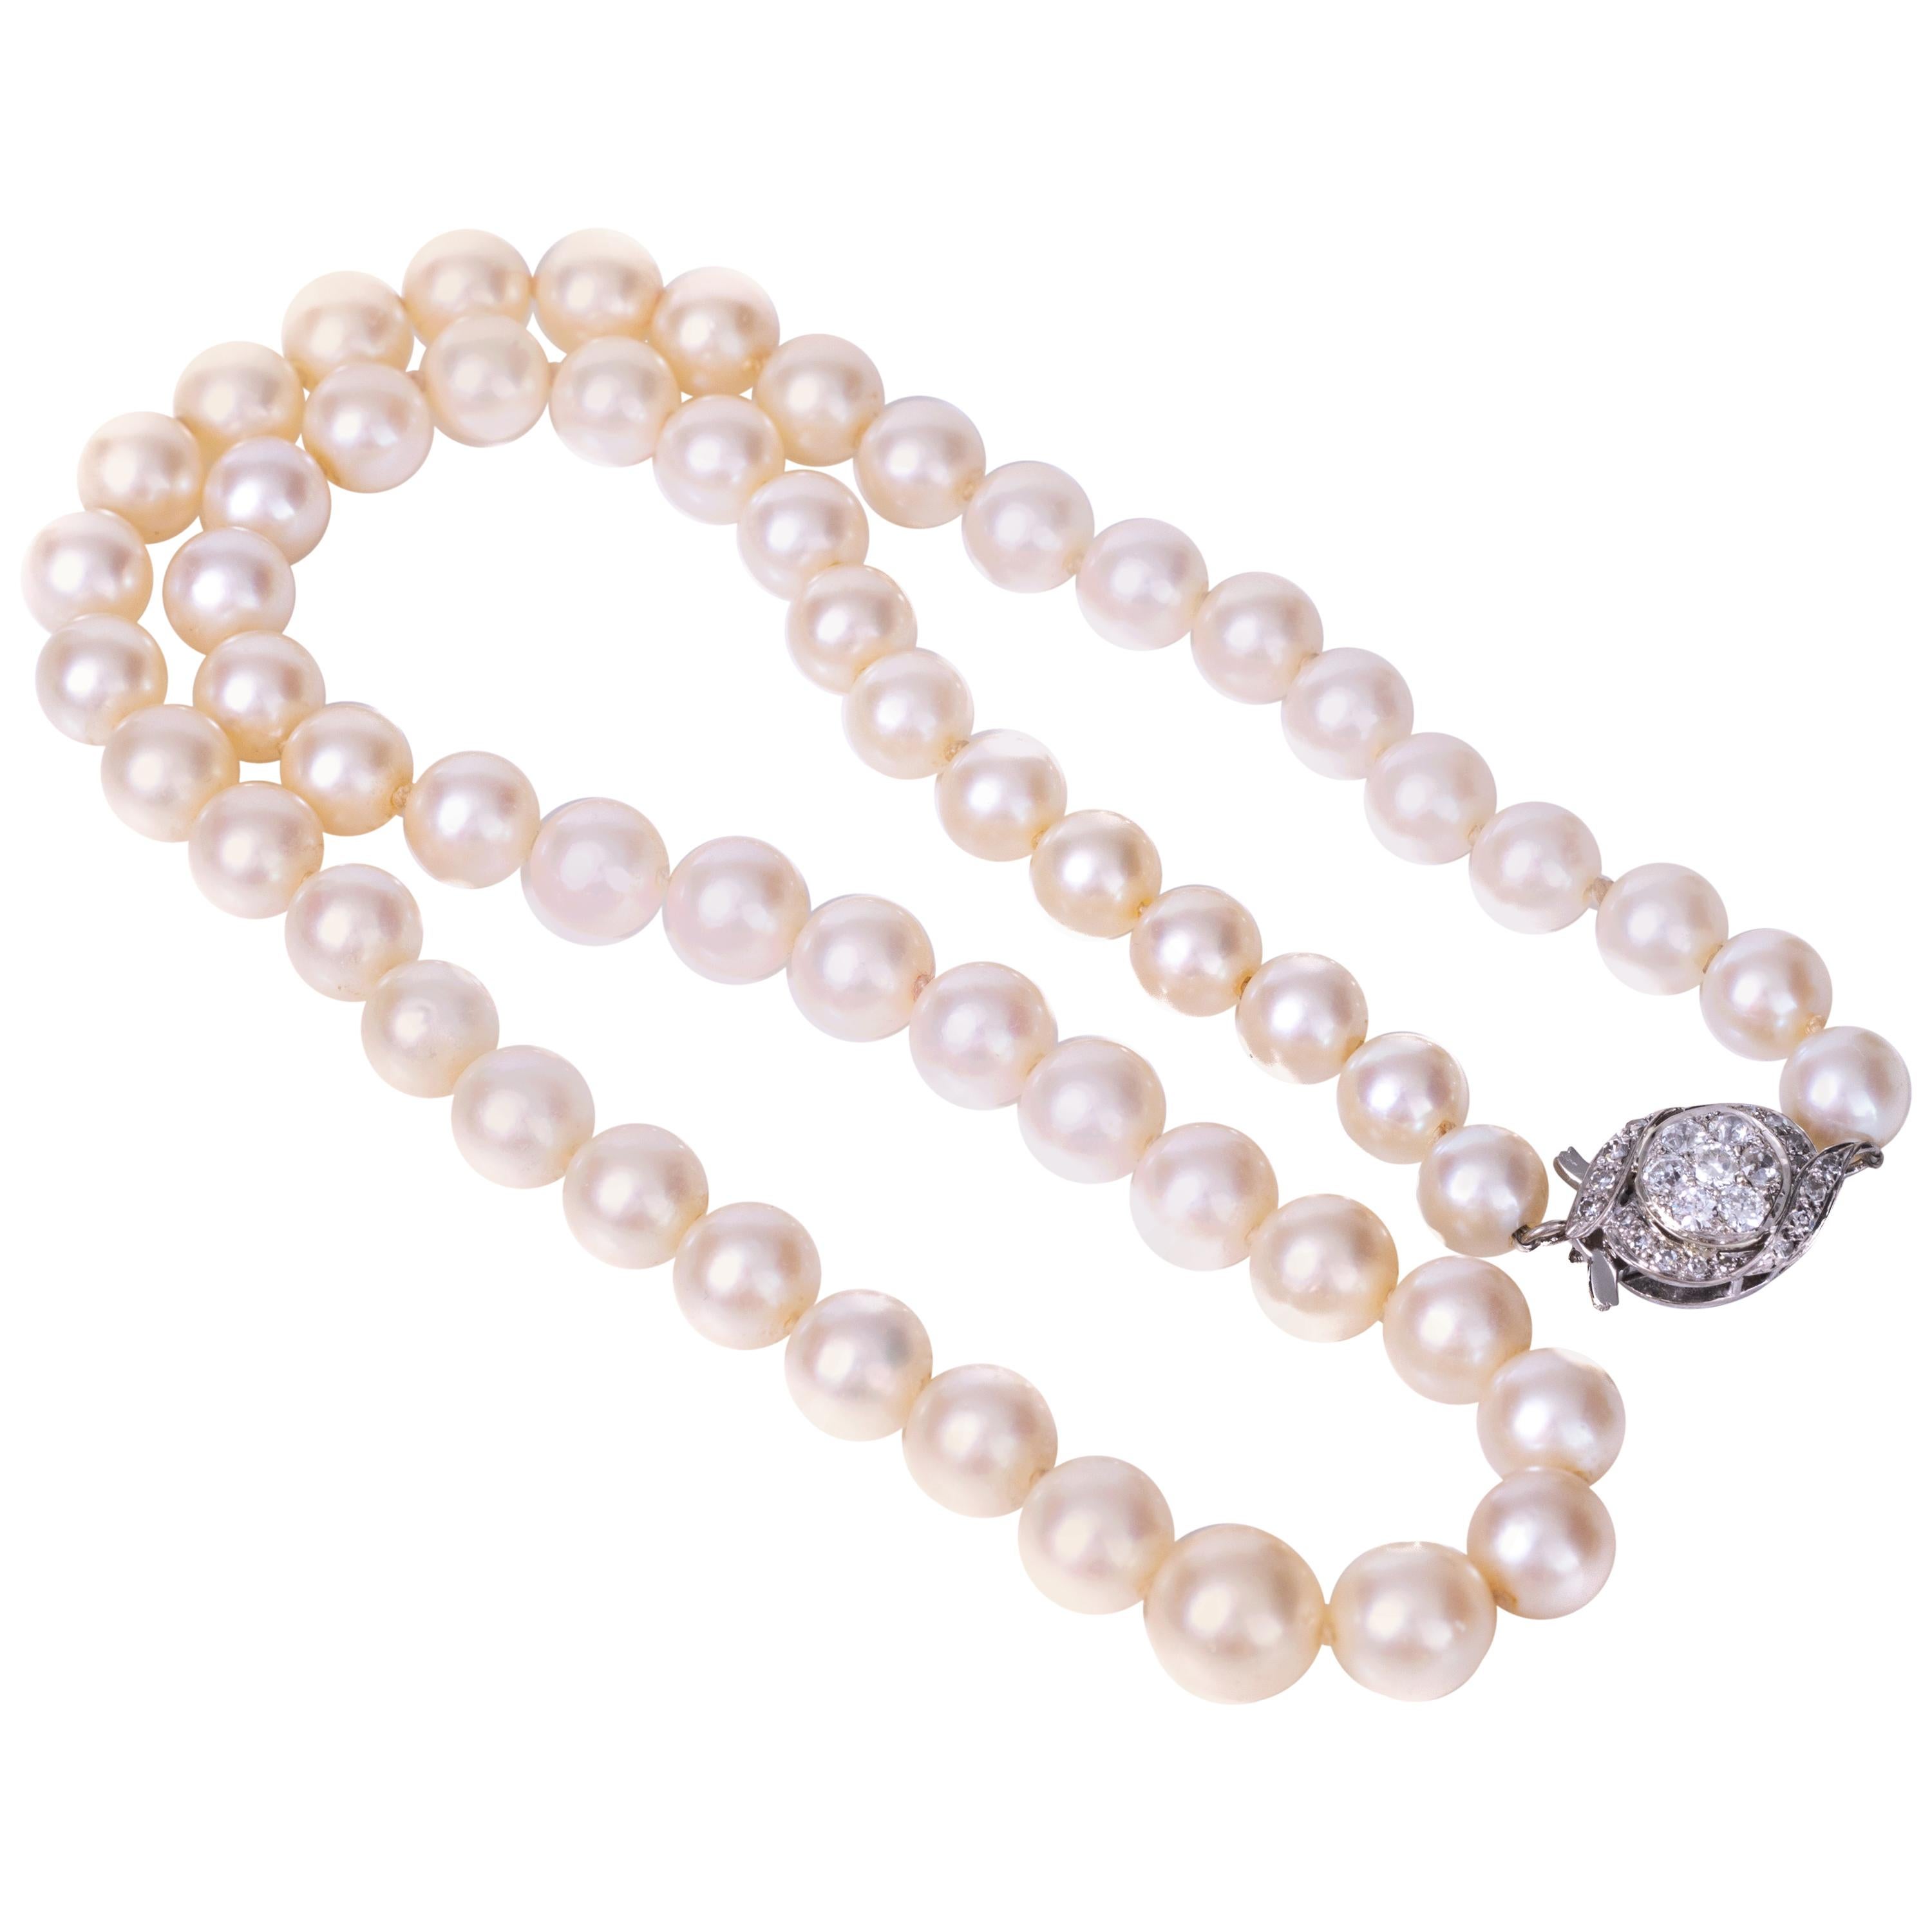 1920s Cultured Pearl Necklace with Diamond Clasp